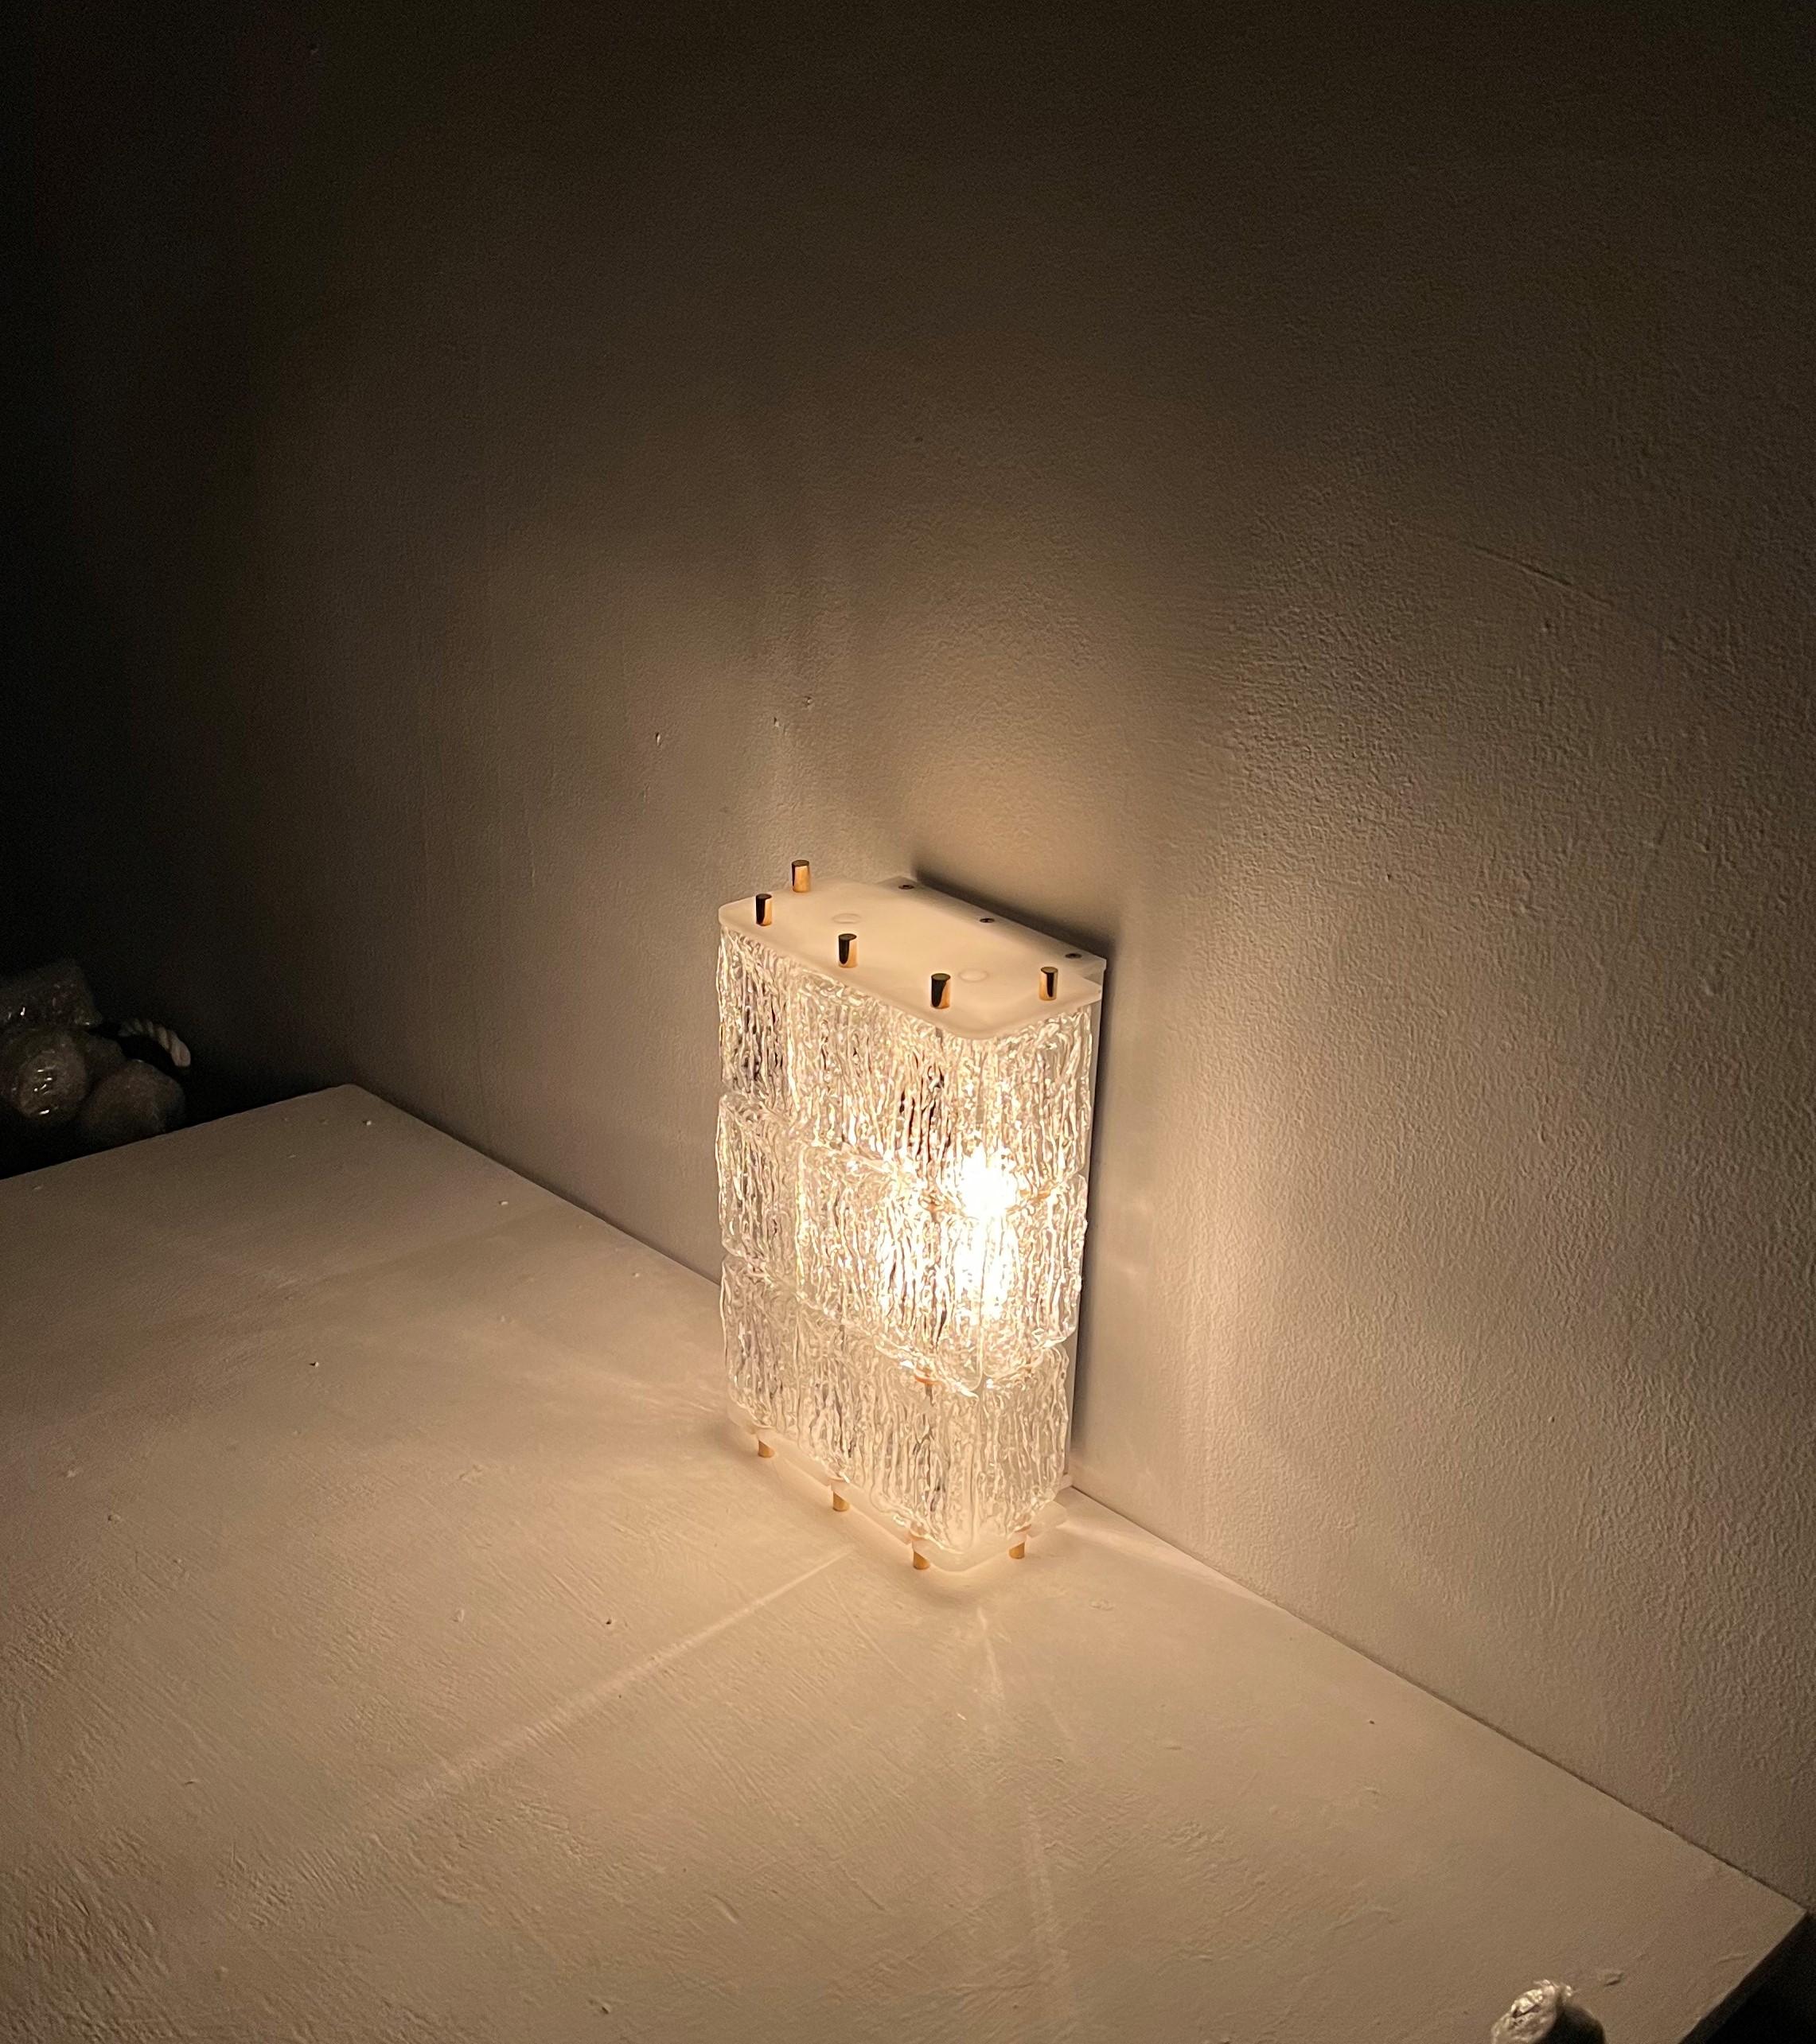 Mid Century Modern Sconces, manufactured in Murano glass.
Each sconce is made of 15 separate pieces of Murano glass and holds Four e14 bulbs.
There are six sconces available, priced indivually.